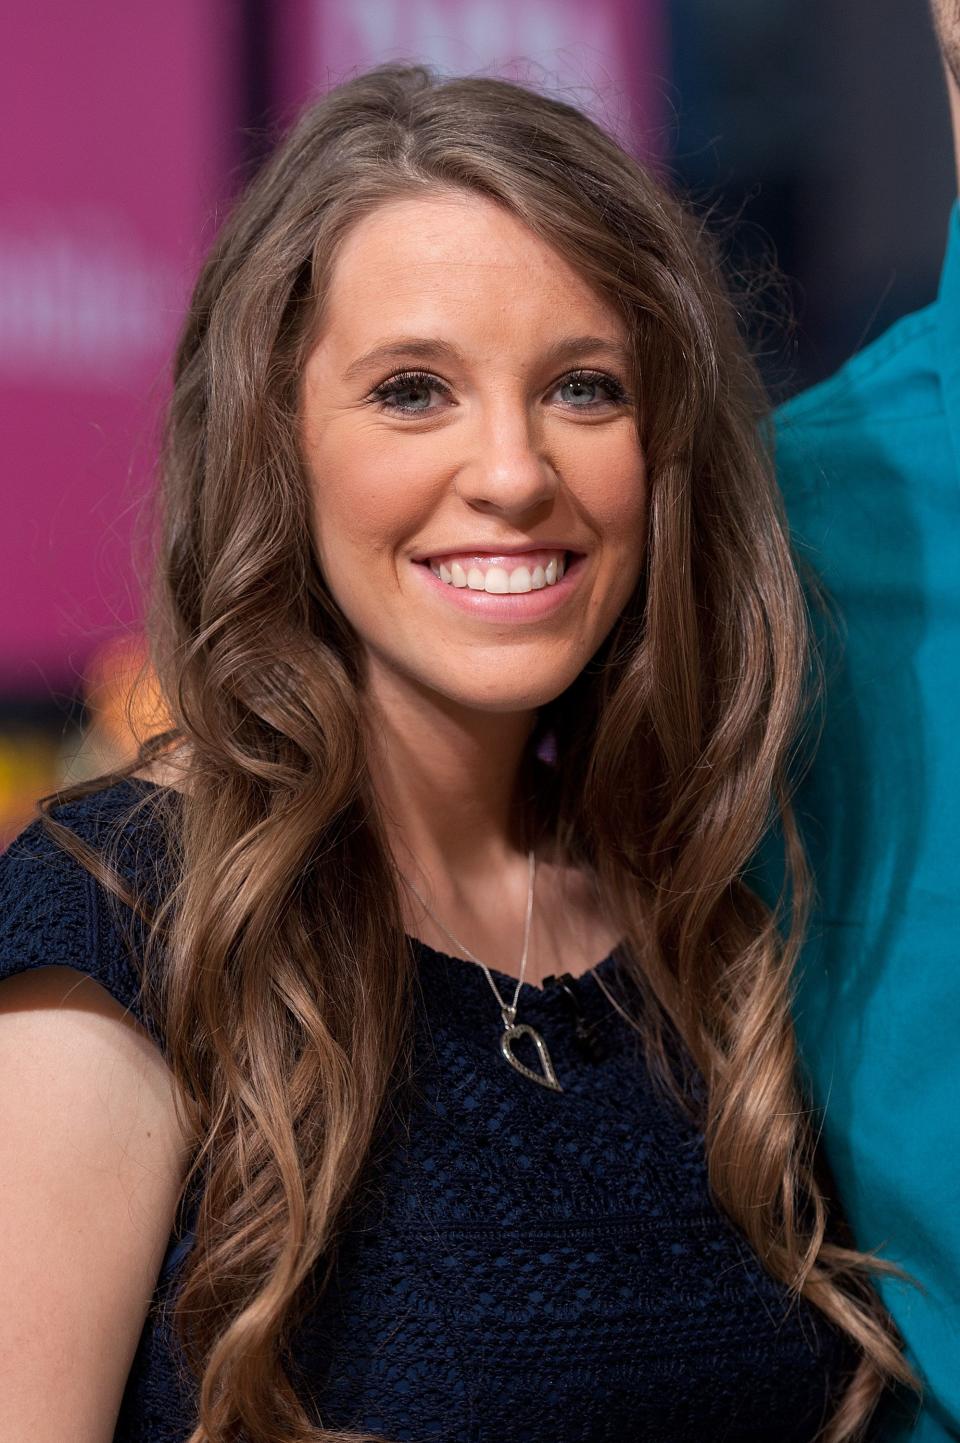 Jill Duggar has a passionate and attractive smile on her face as she poses for the camera